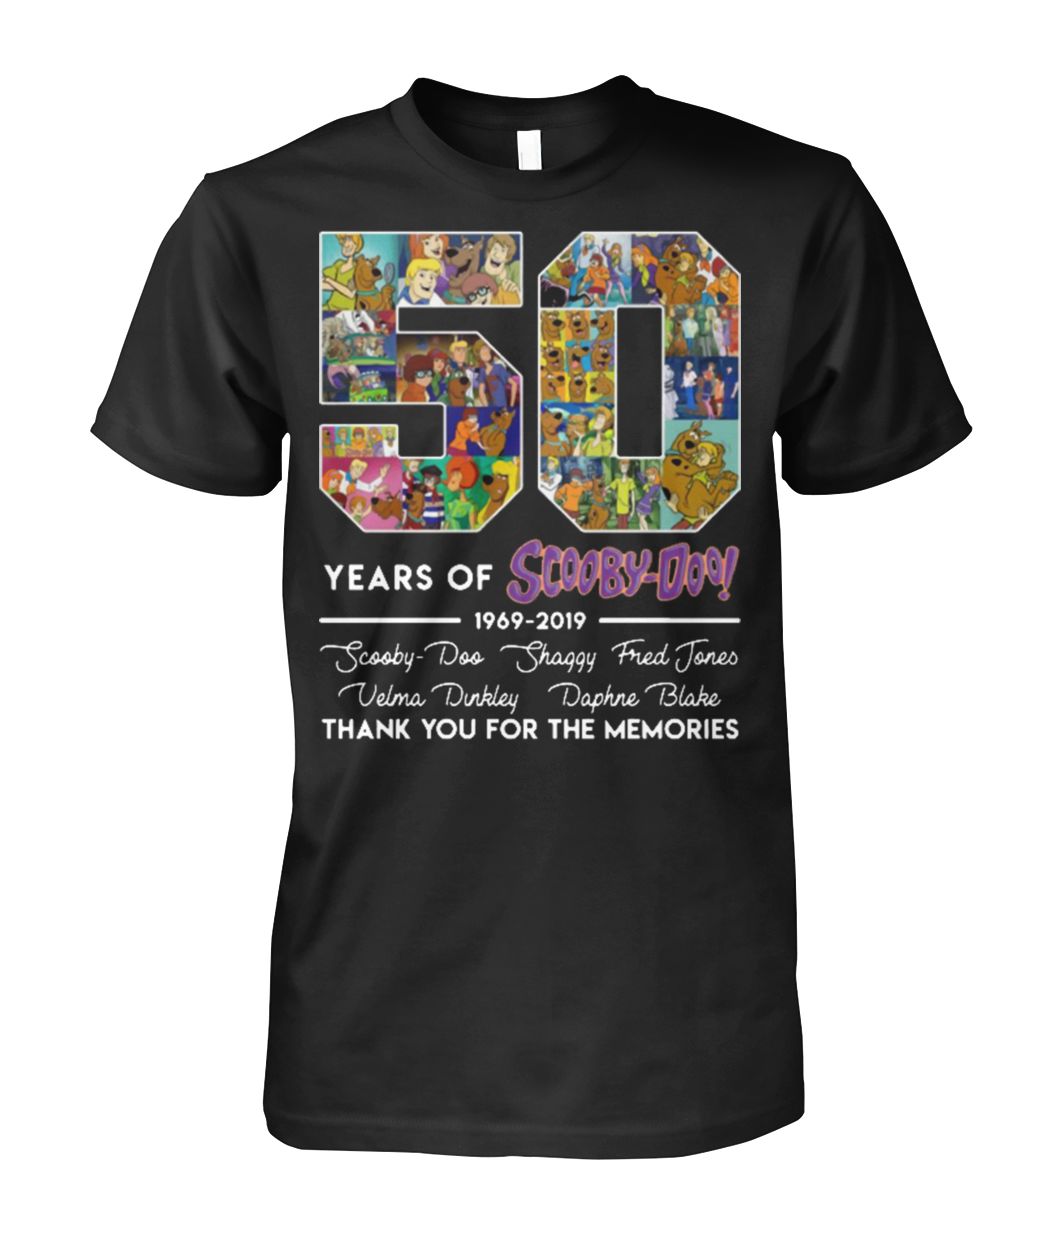 50 Years Of Scooby-Doo 1969-2019 Thank You For The Memories Signatures